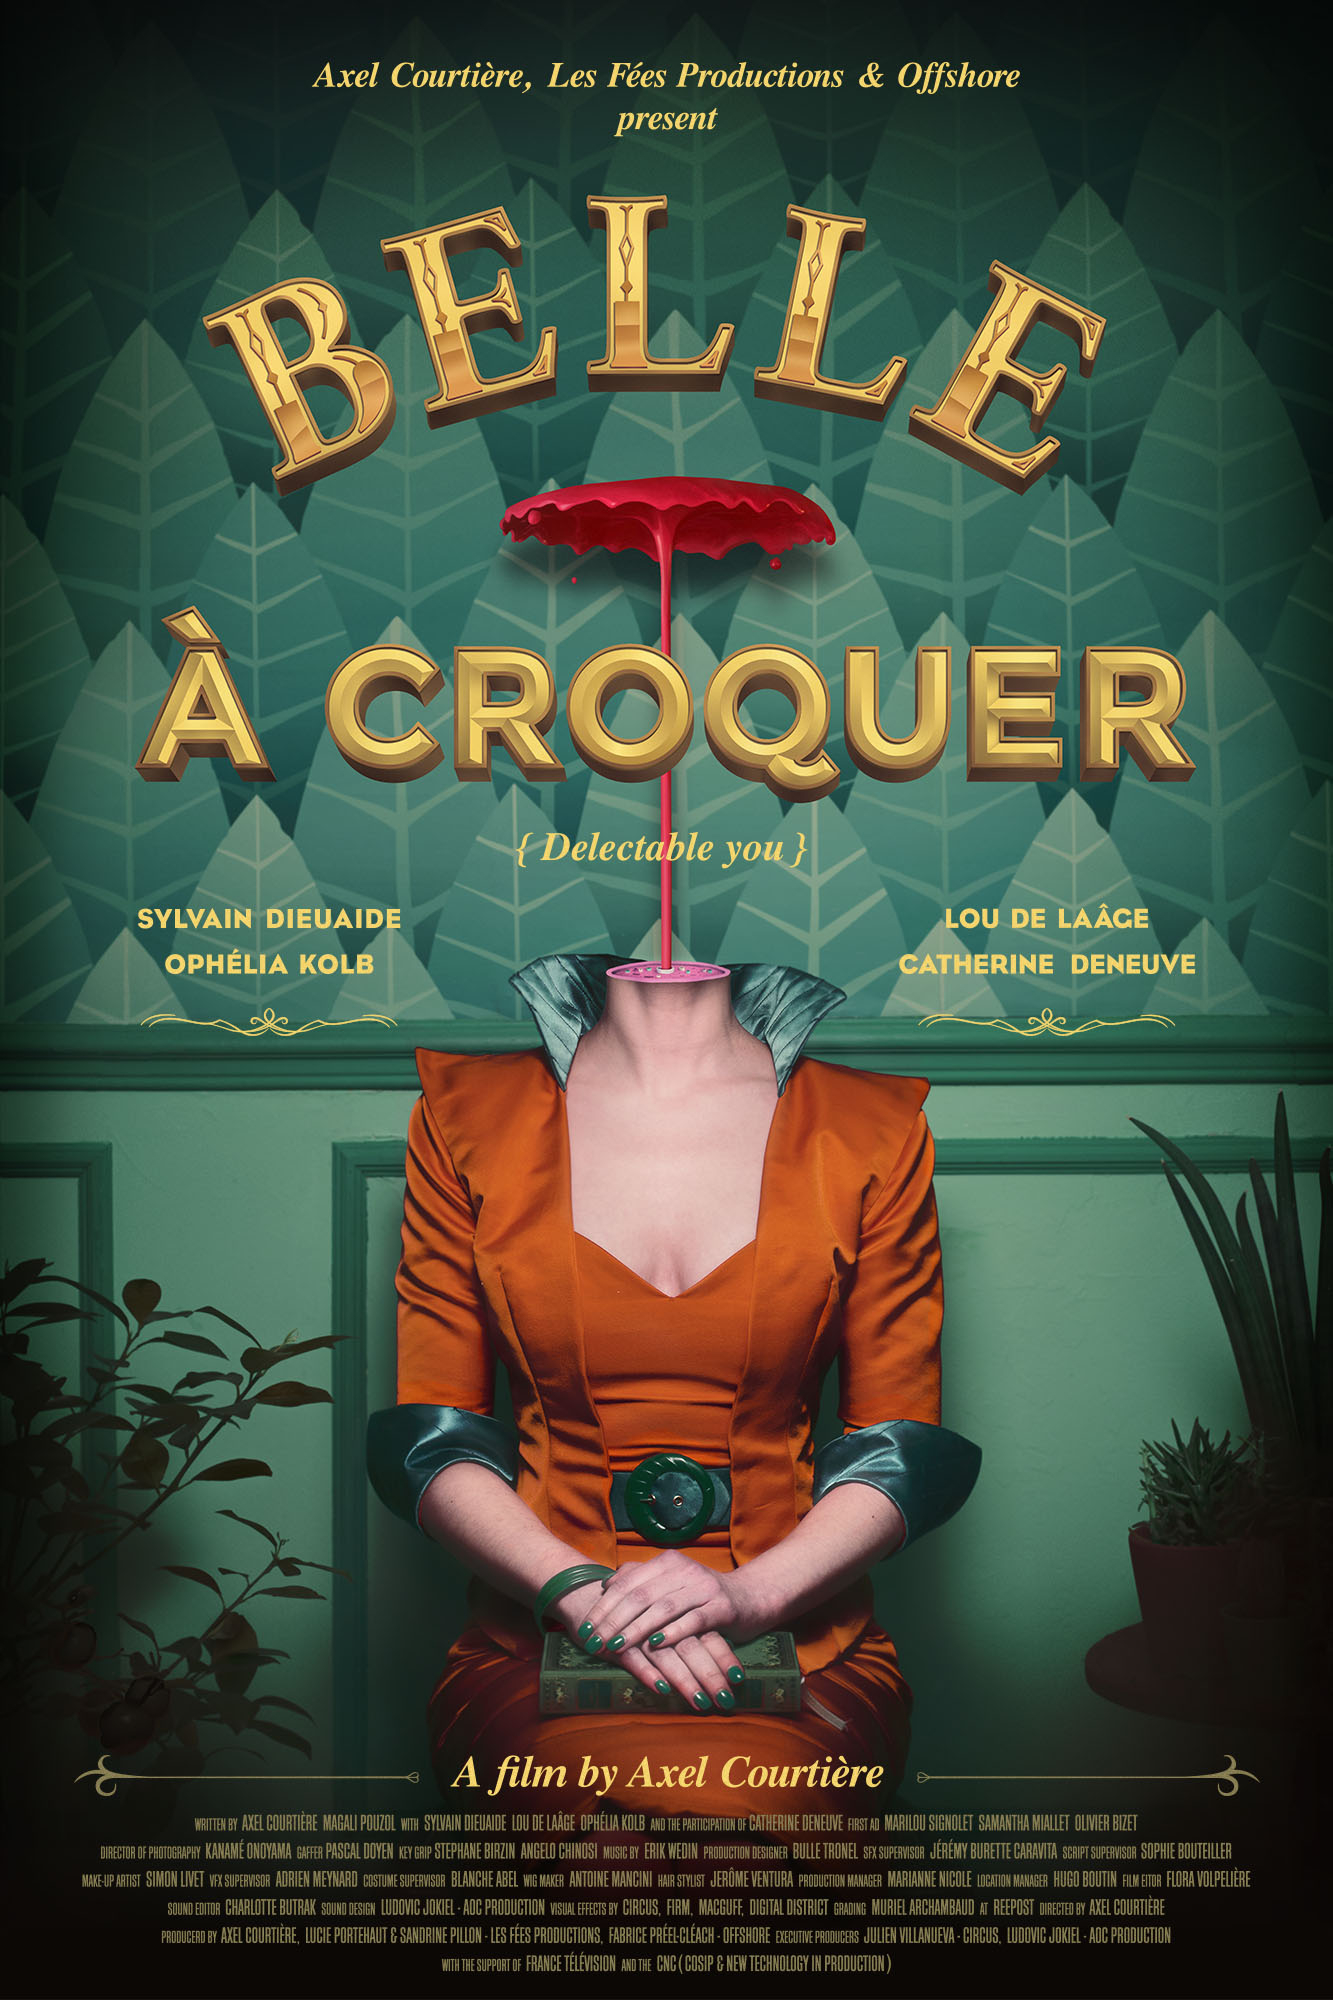 Belle à croquer (2017) with English Subtitles on DVD on DVD